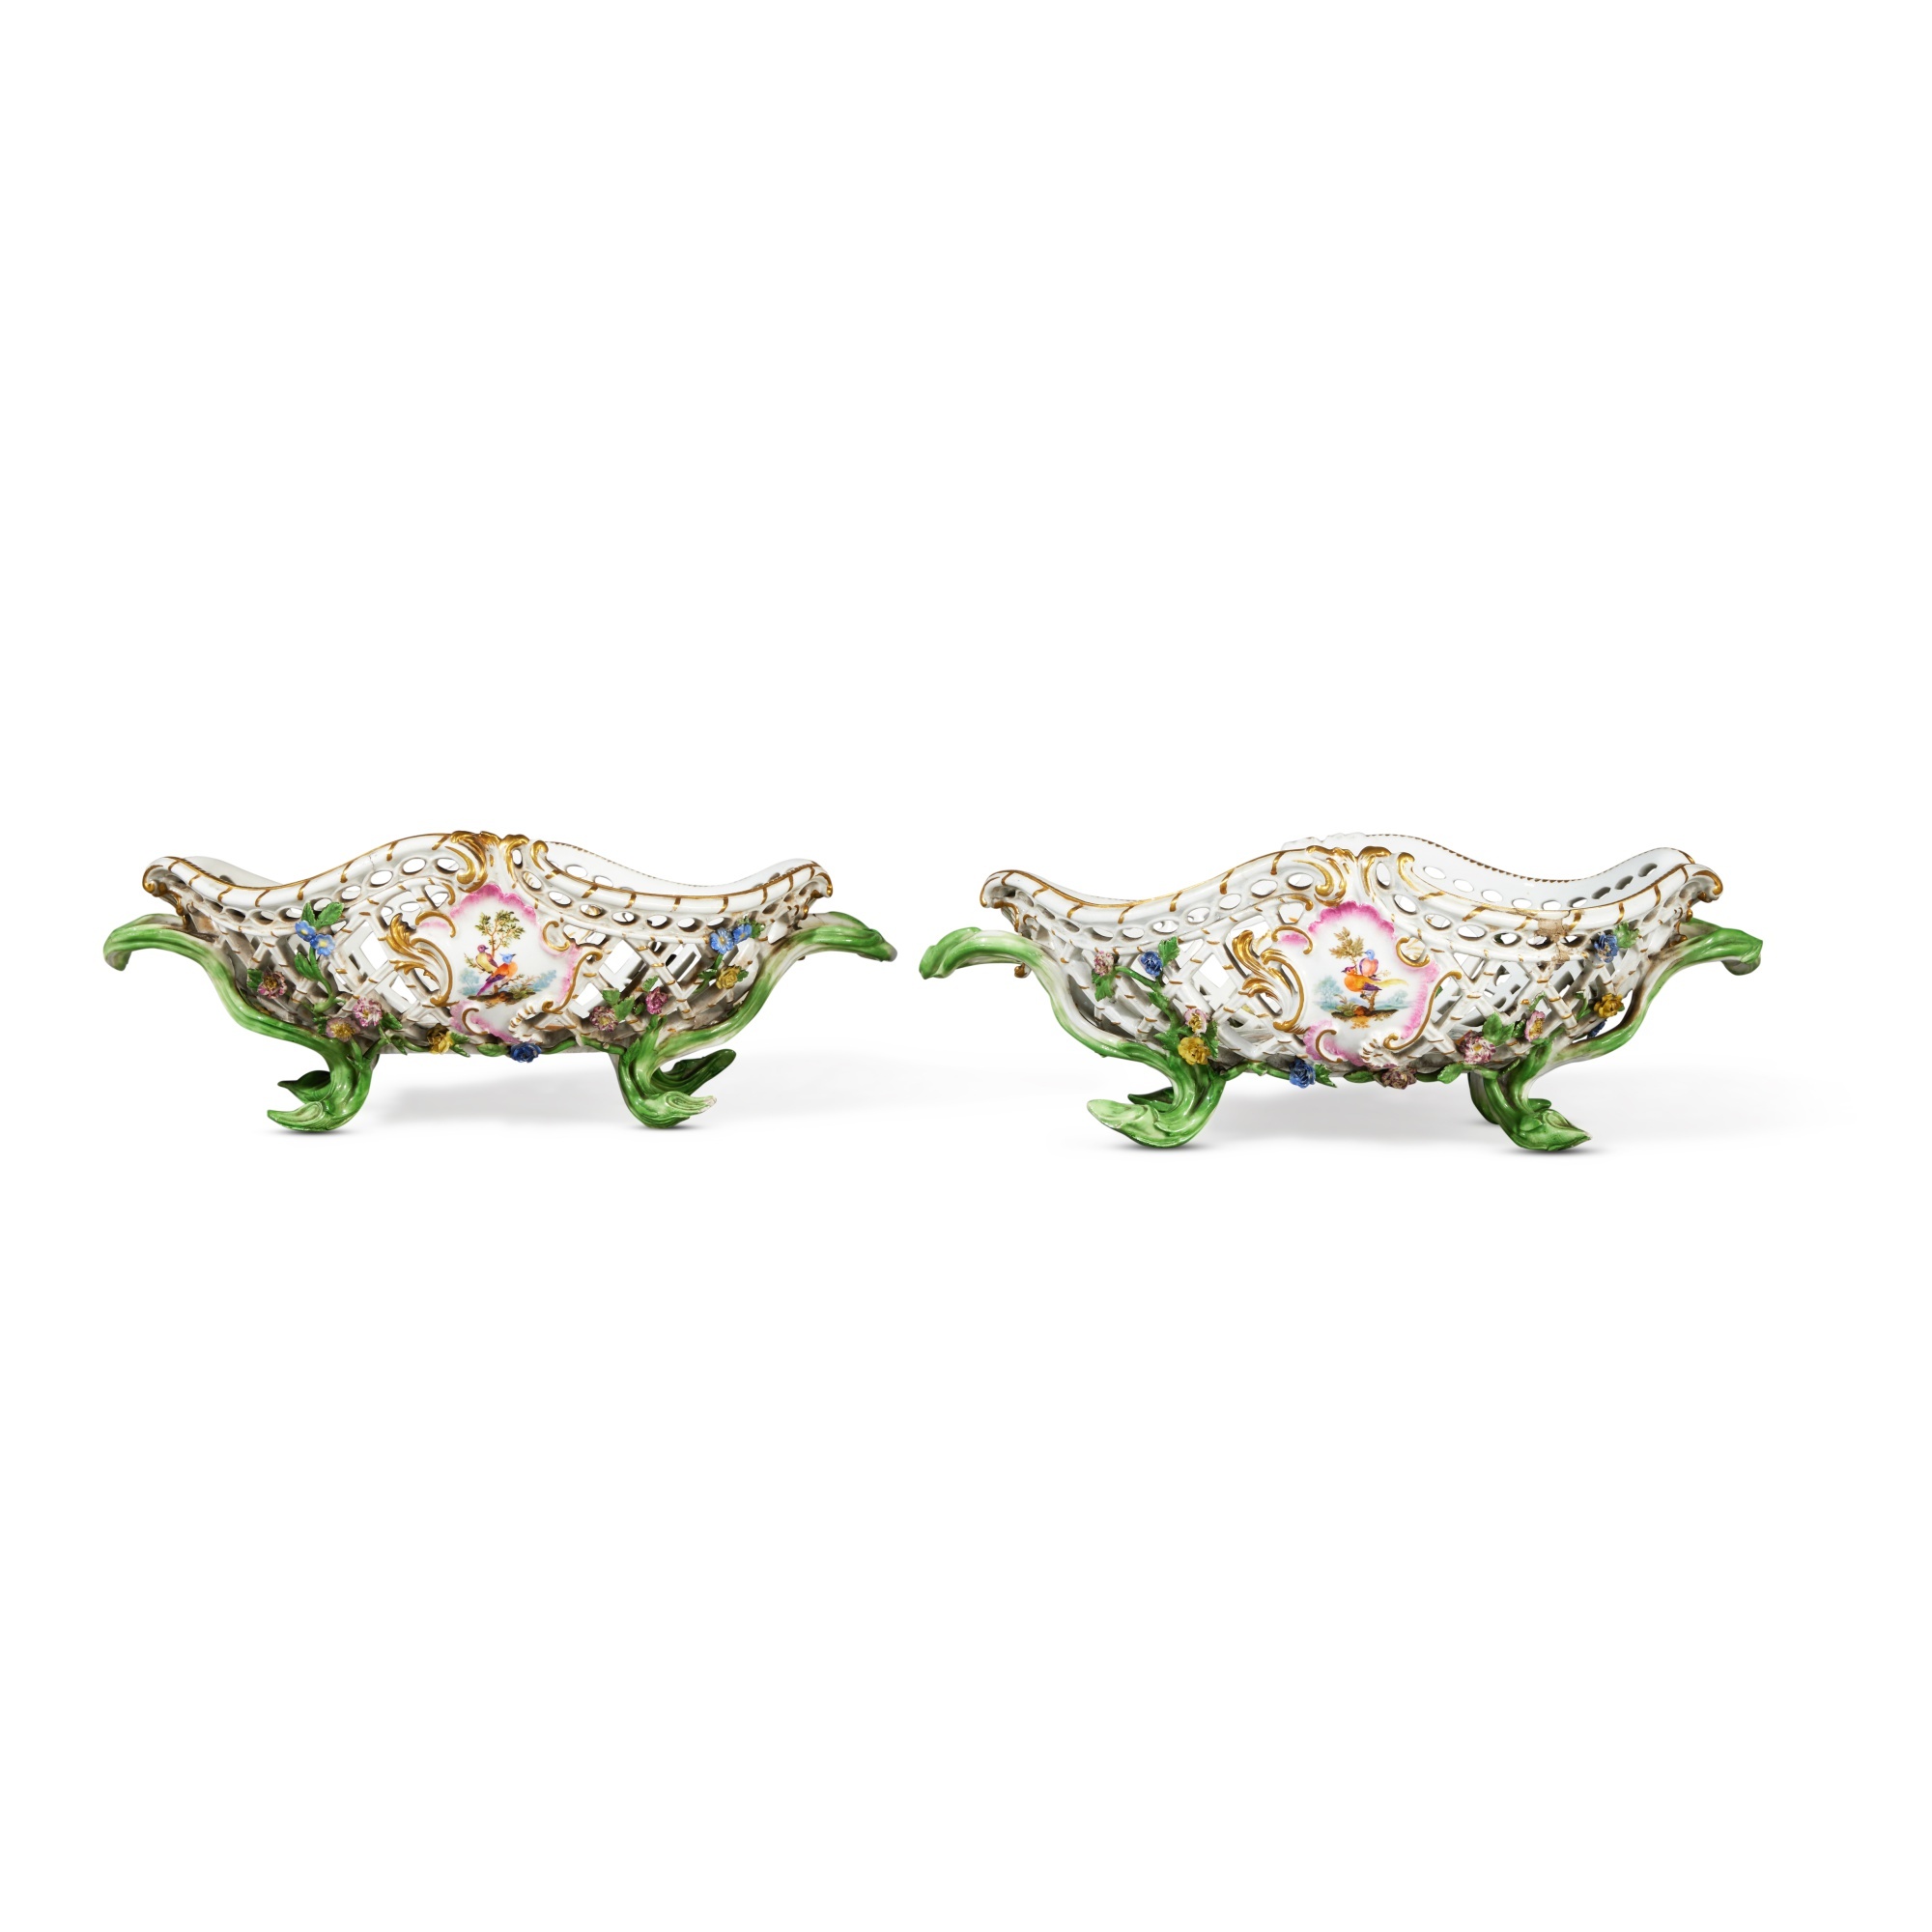 A Pair of Meissen Reticulated Footed Baskets, Circa 1770 - Image 2 of 4